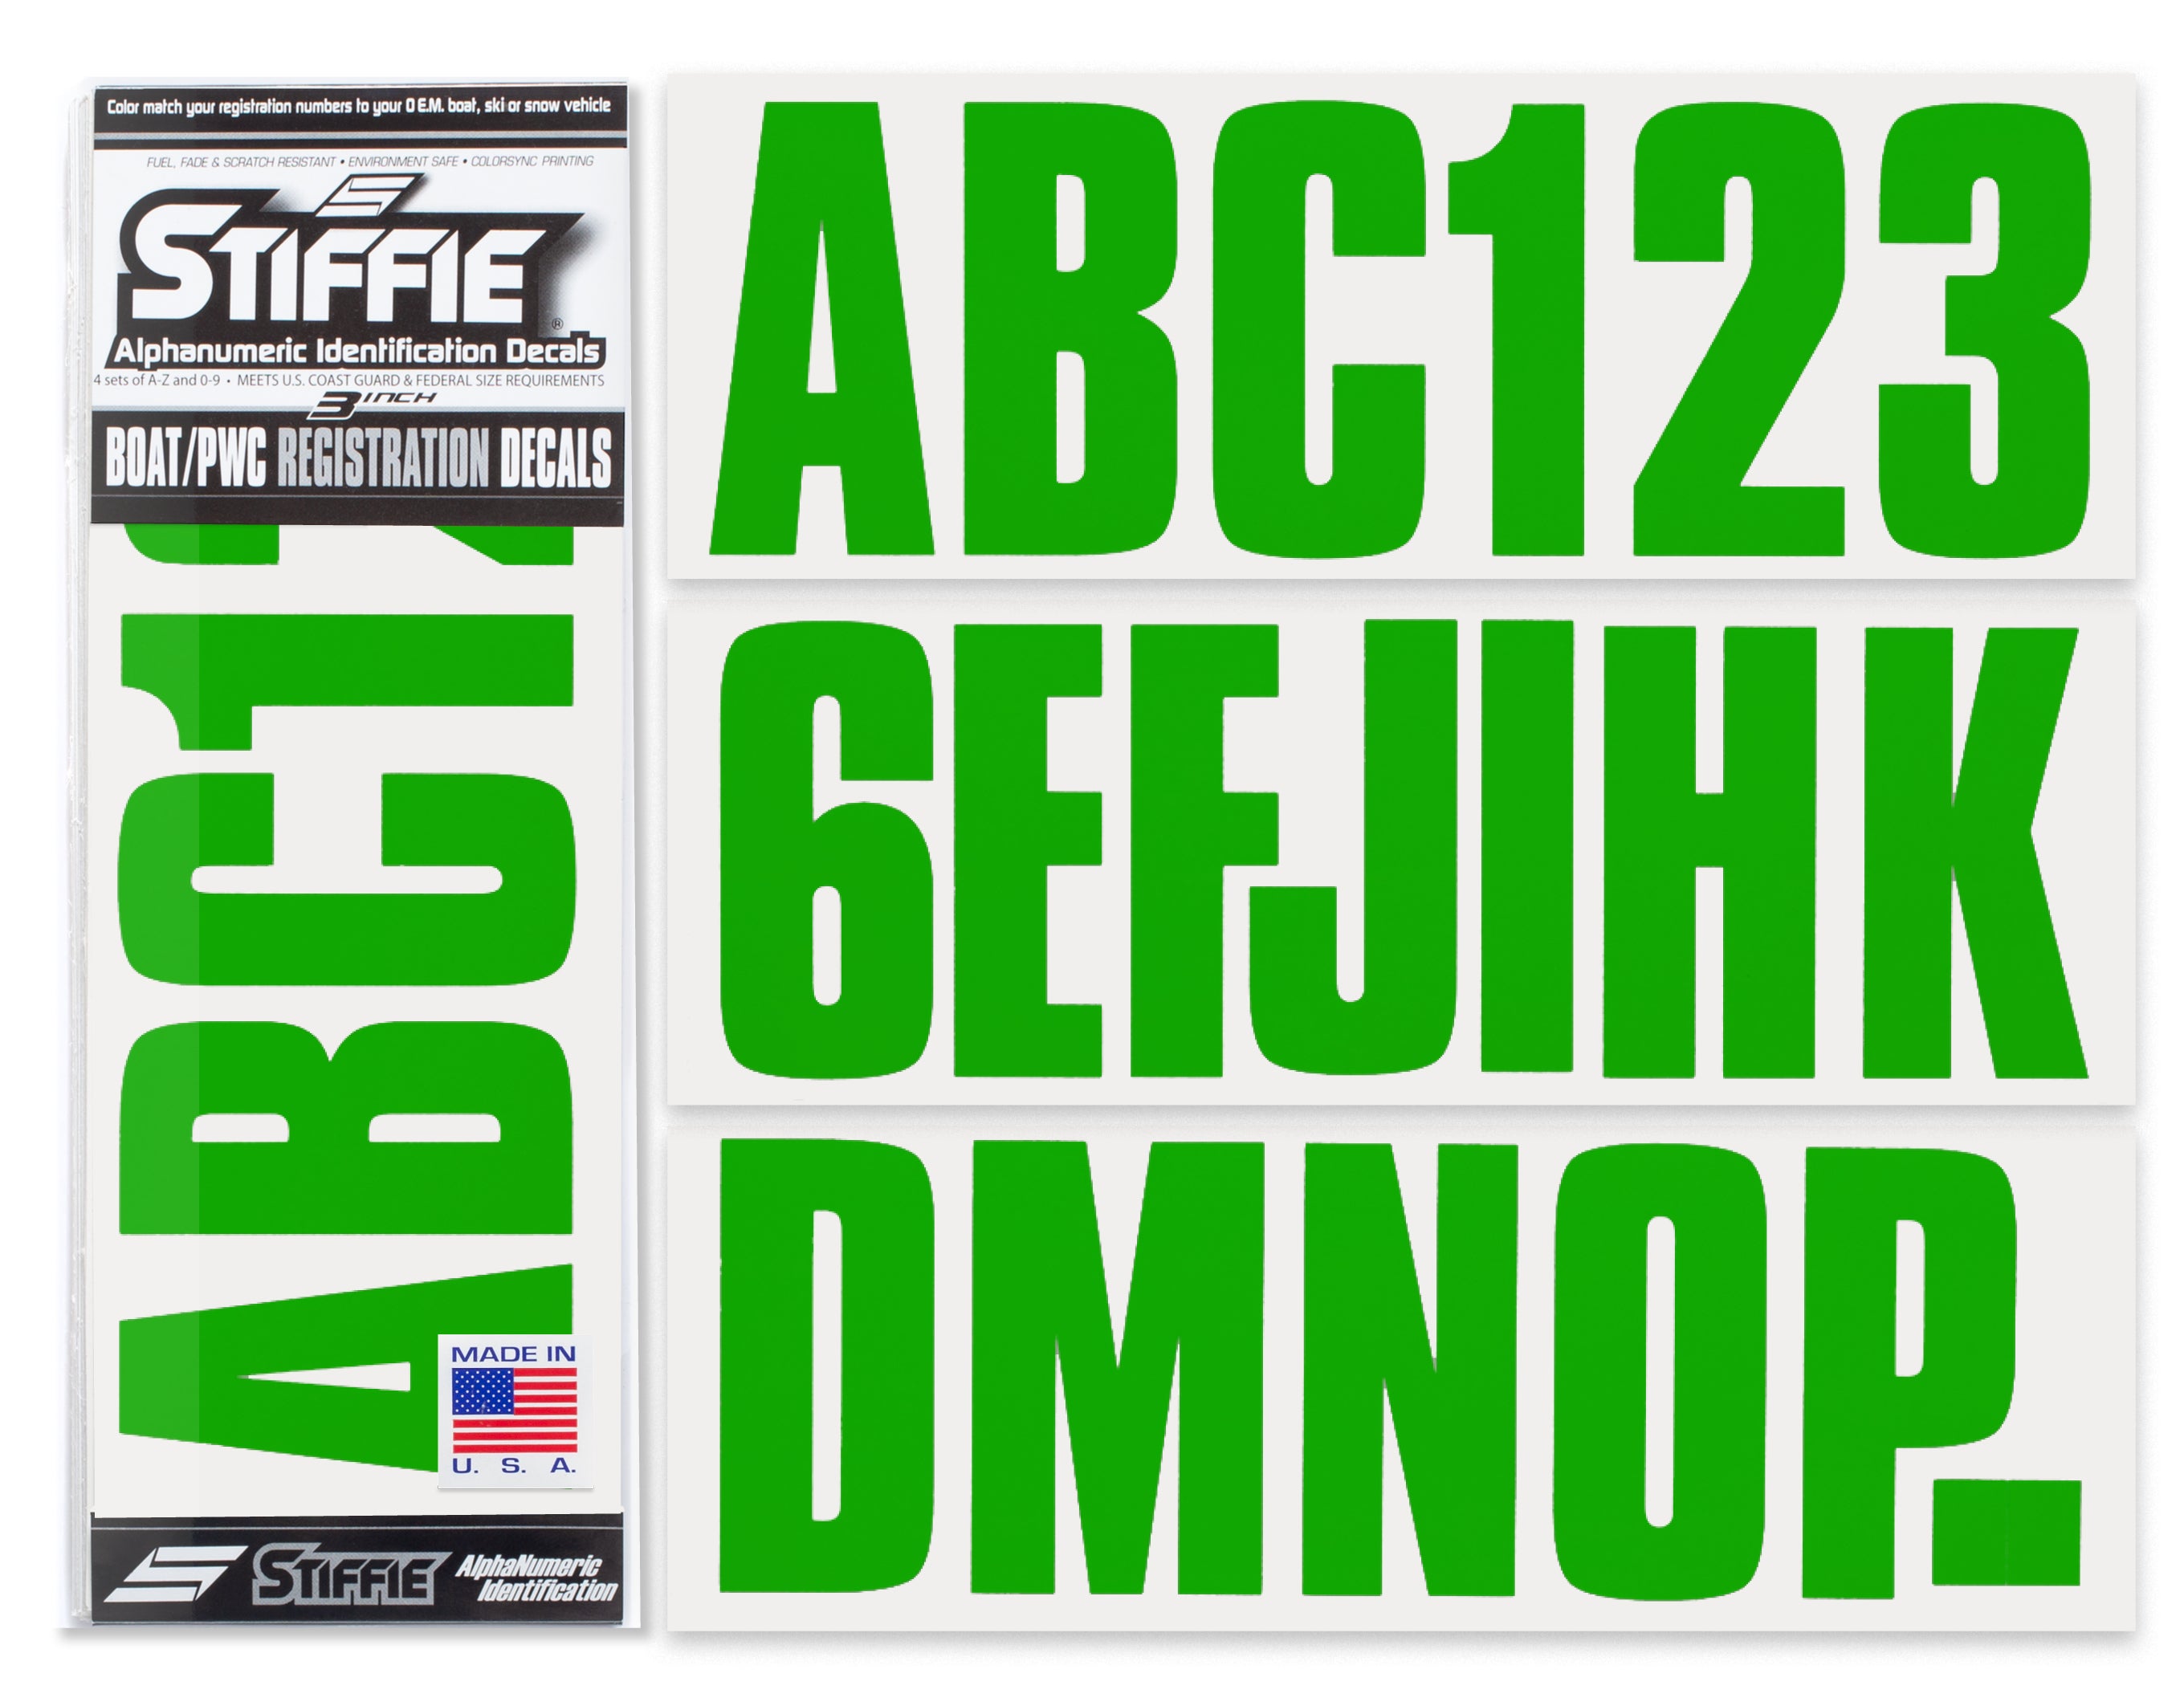 STIFFIE Uniline Green 3" ID Kit Alpha-Numeric Registration Identification Numbers Stickers Decals for Boats & Personal Watercraft